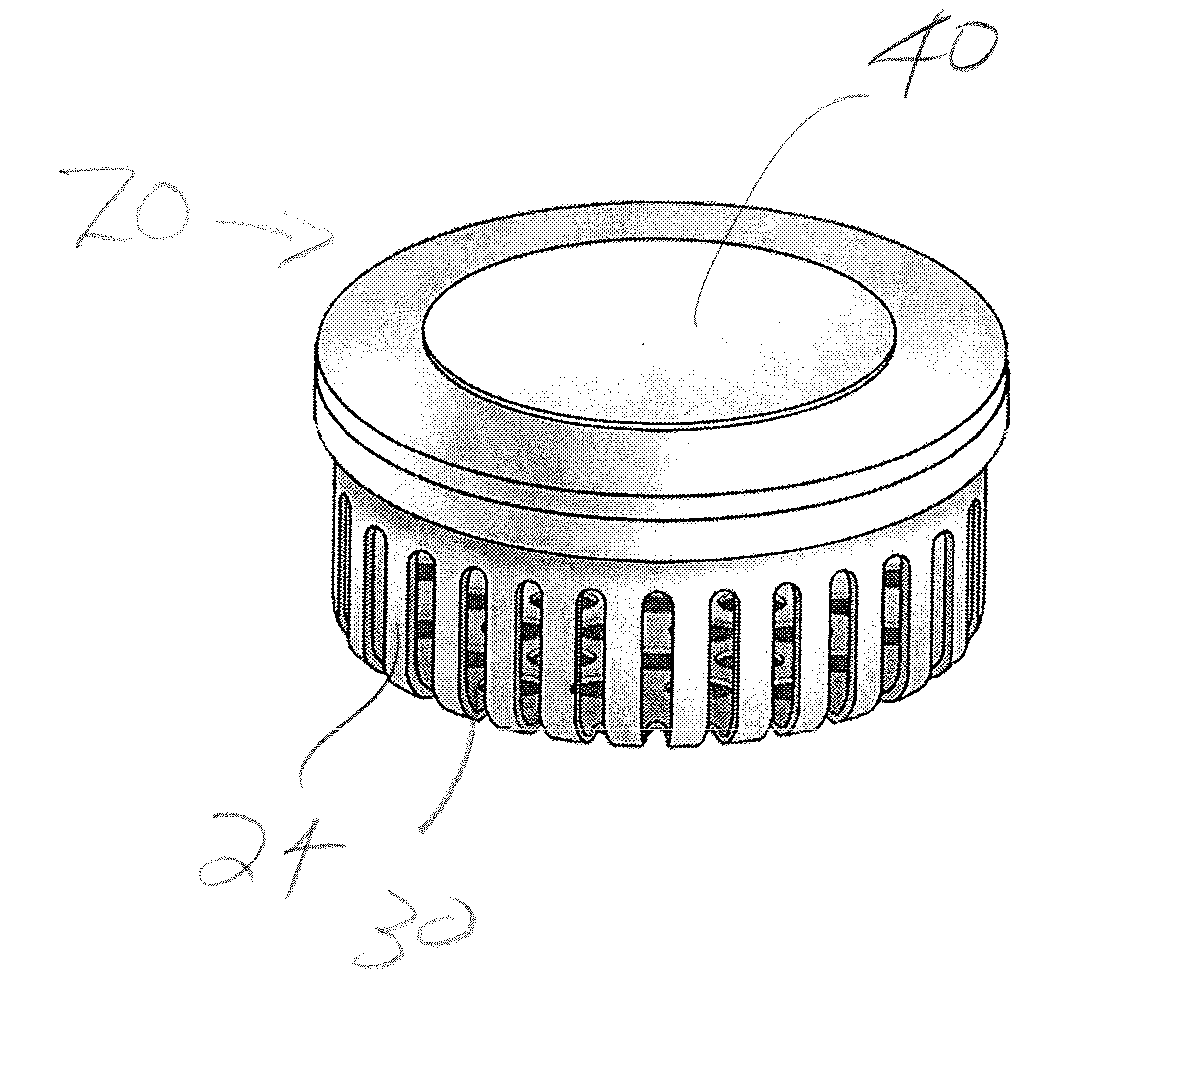 Storage container for holding desiccant and insert to convert standardized storage container to hold desiccant